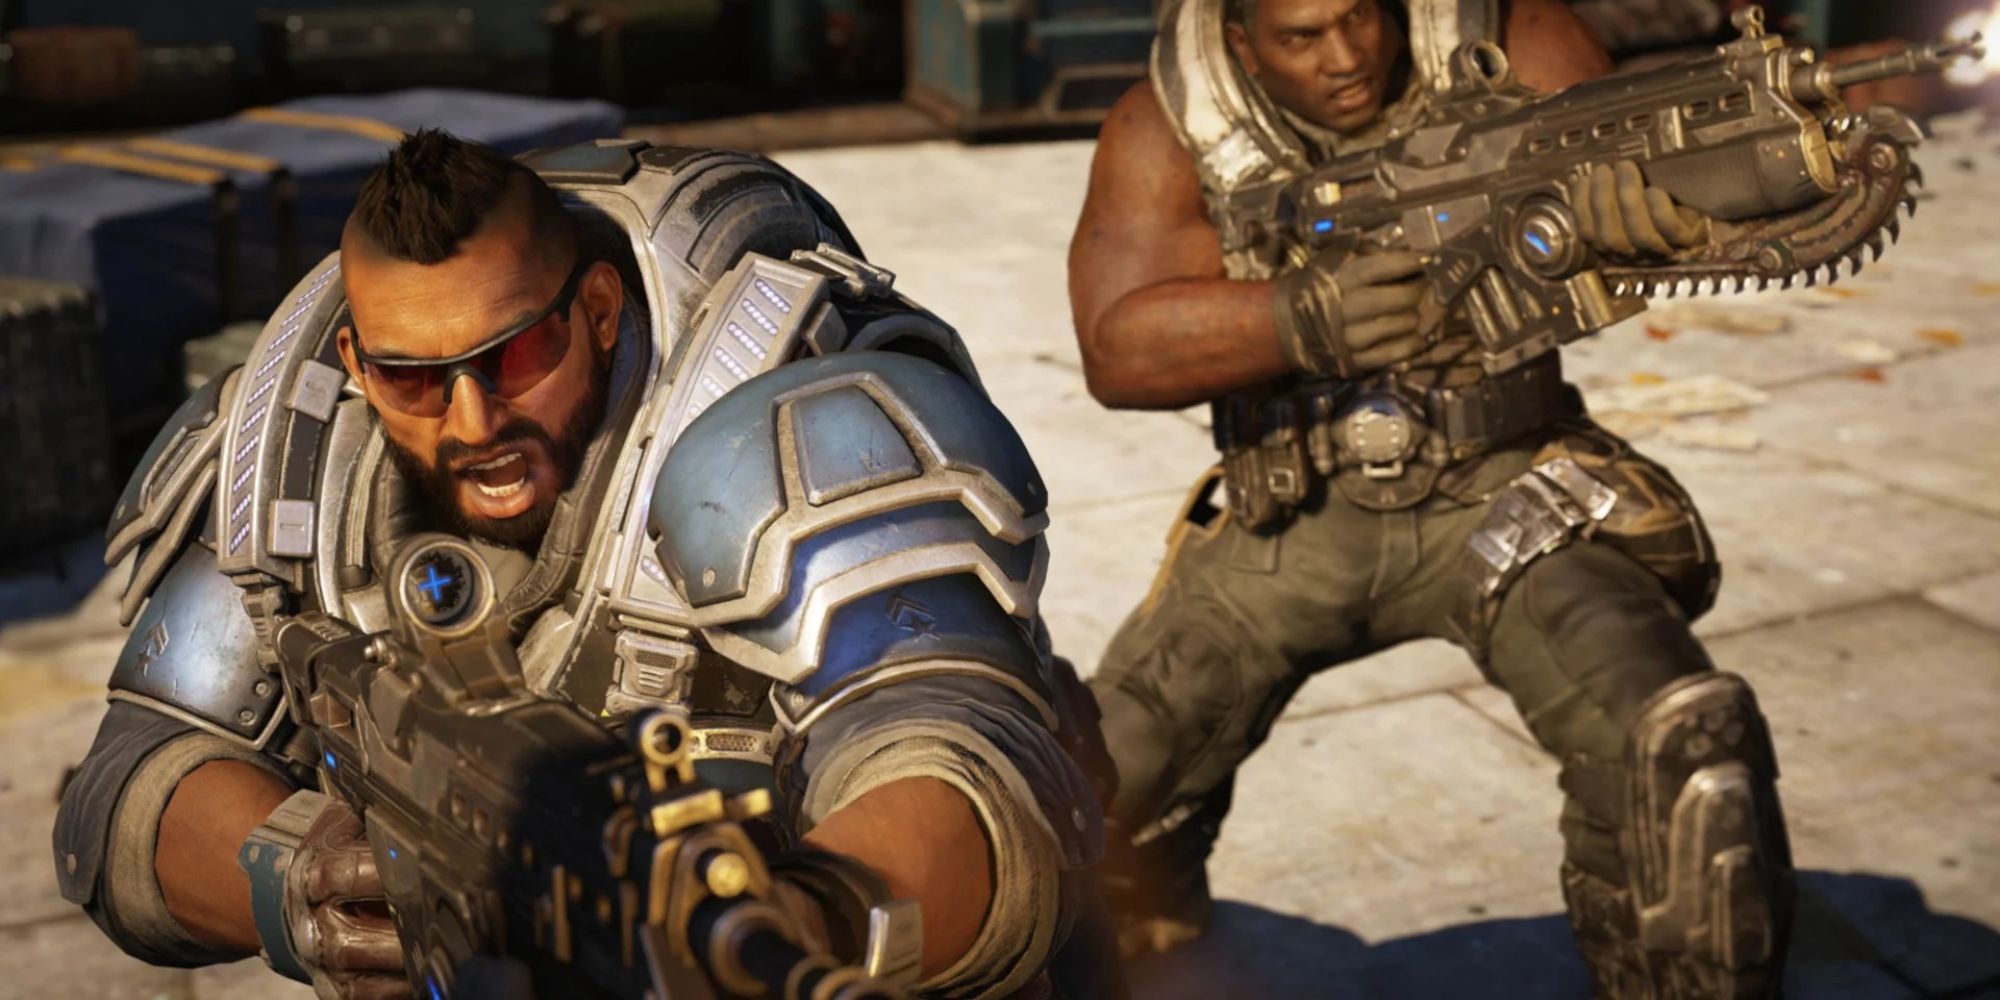 coalition 3rd person xbox shooter gears 5 characters